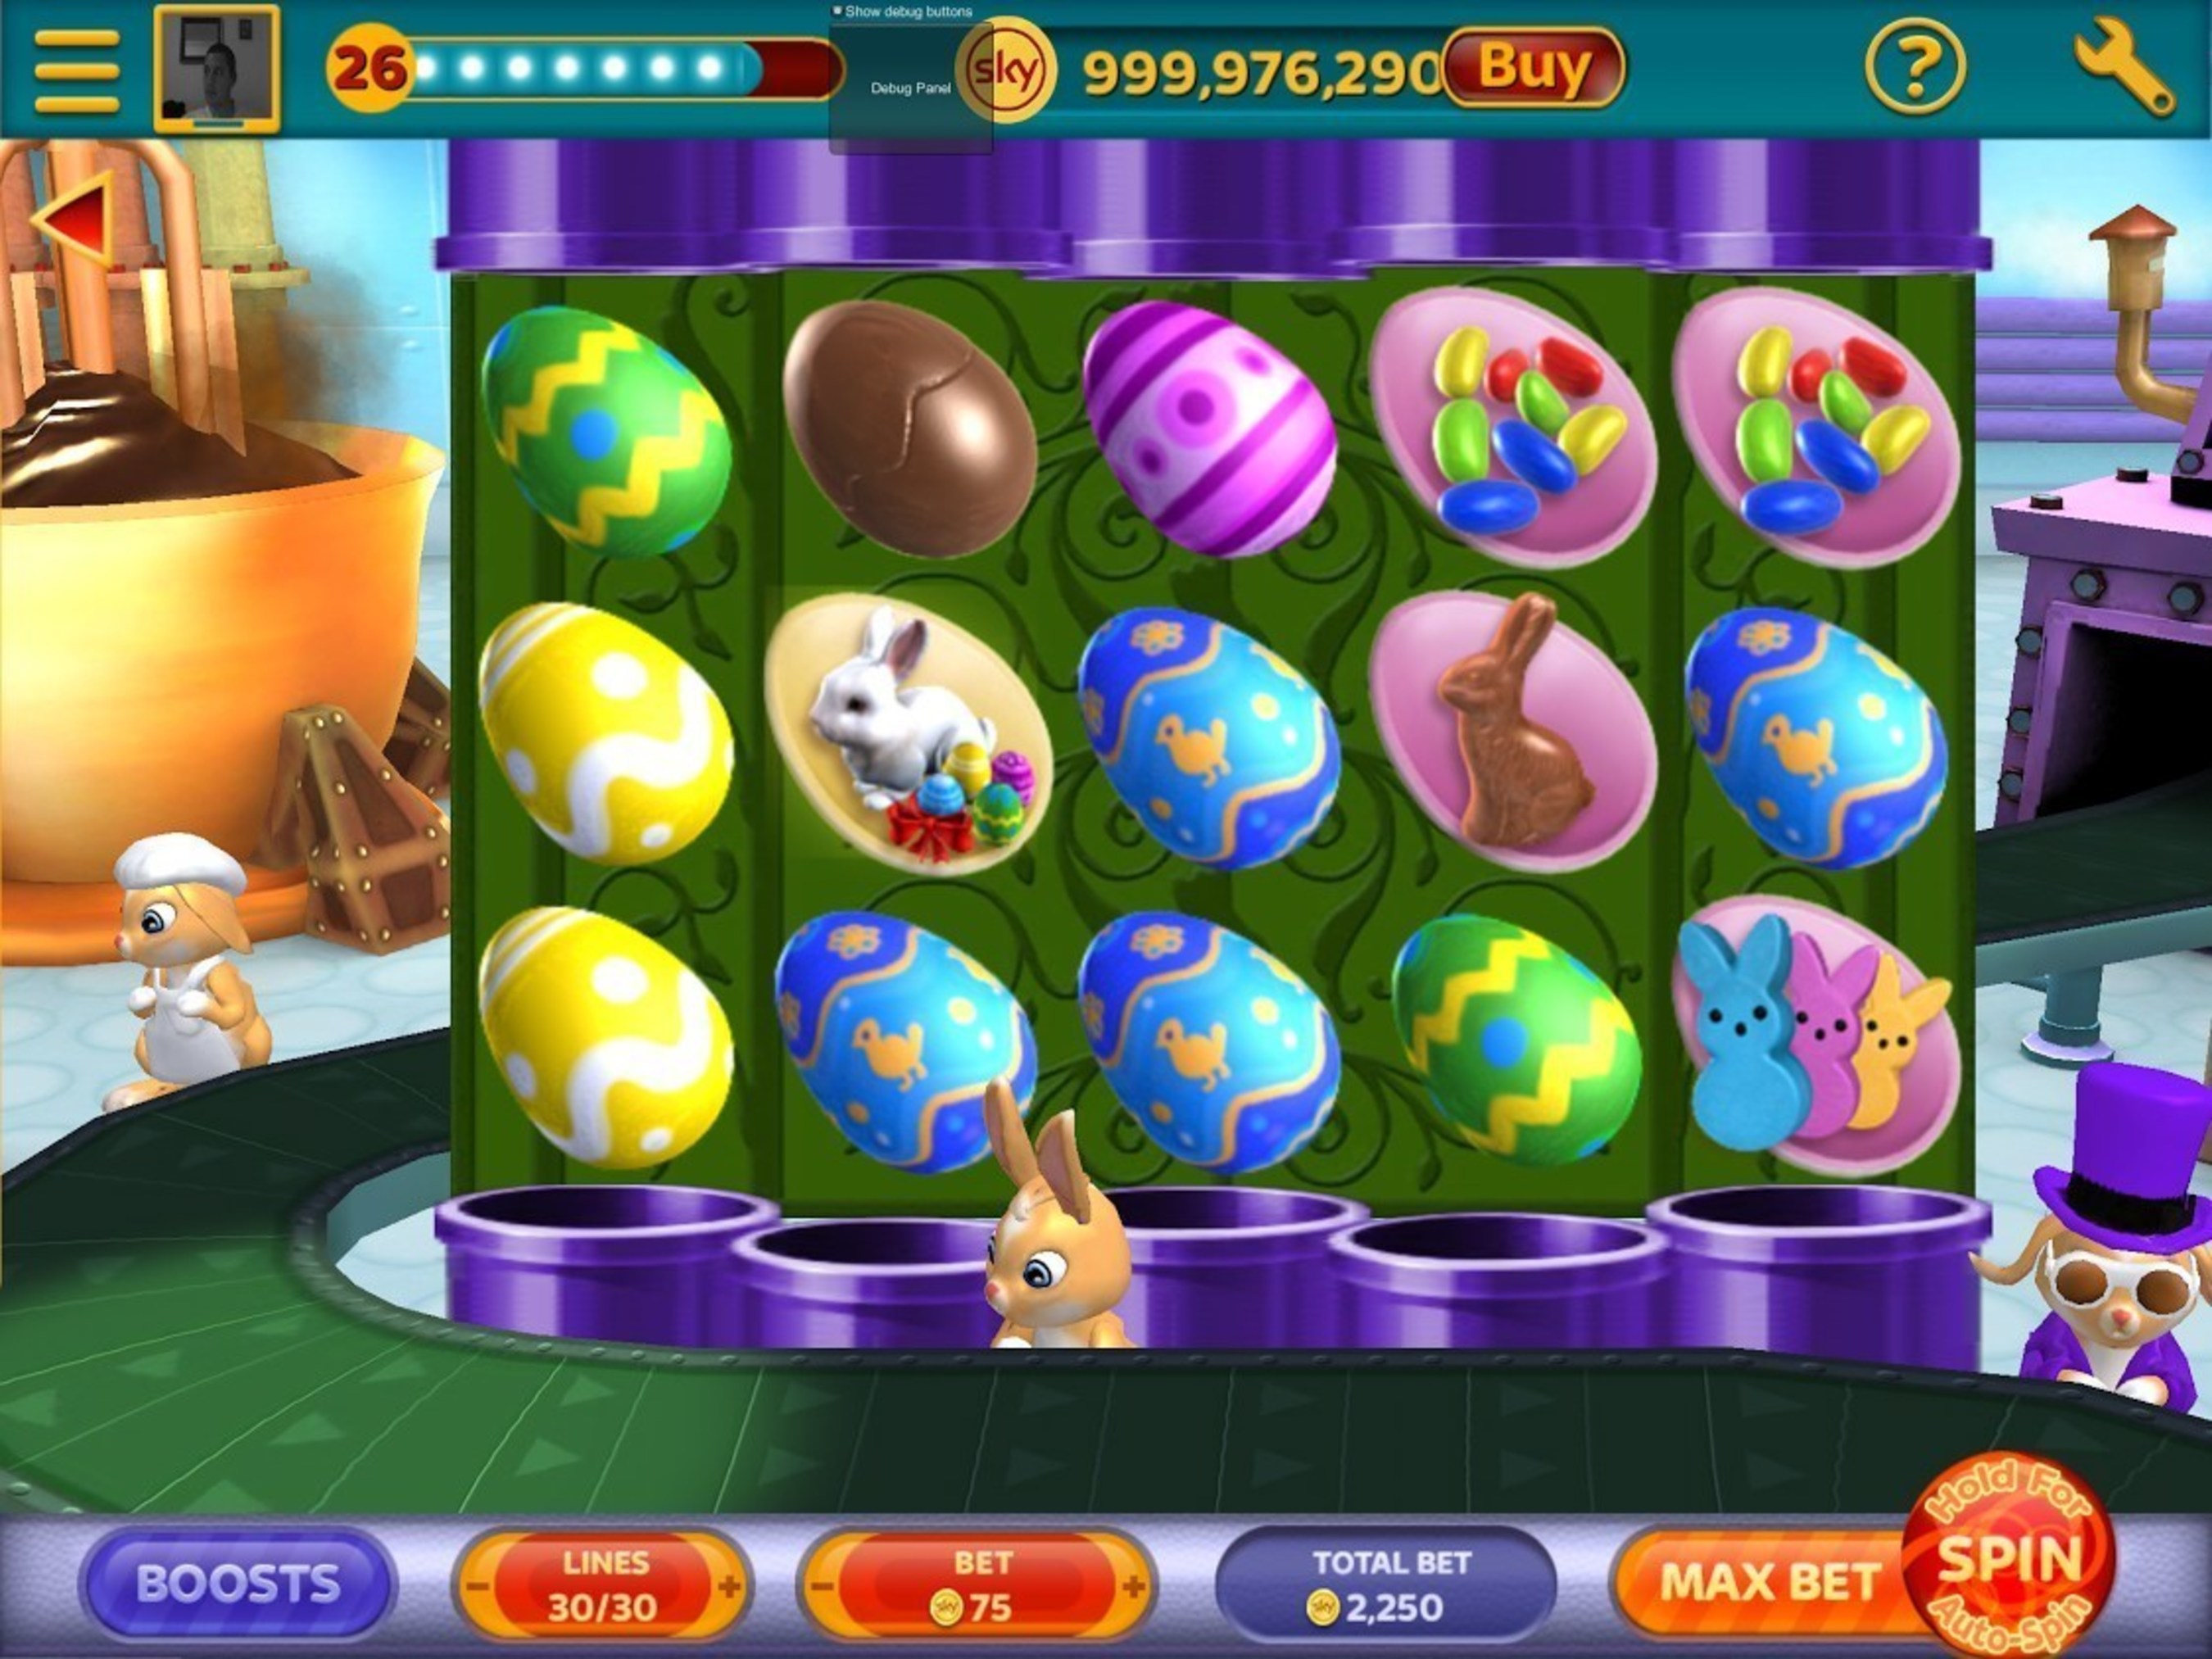 Egg-tastic: Our Easter Bunny has taken over the chocolate factory! The treats are flowing in this world of indulgence. Colourful eggs, marshmallow chicks and more abound! Lucky players will unlock the Easter egg hunt for rewards and prizes!